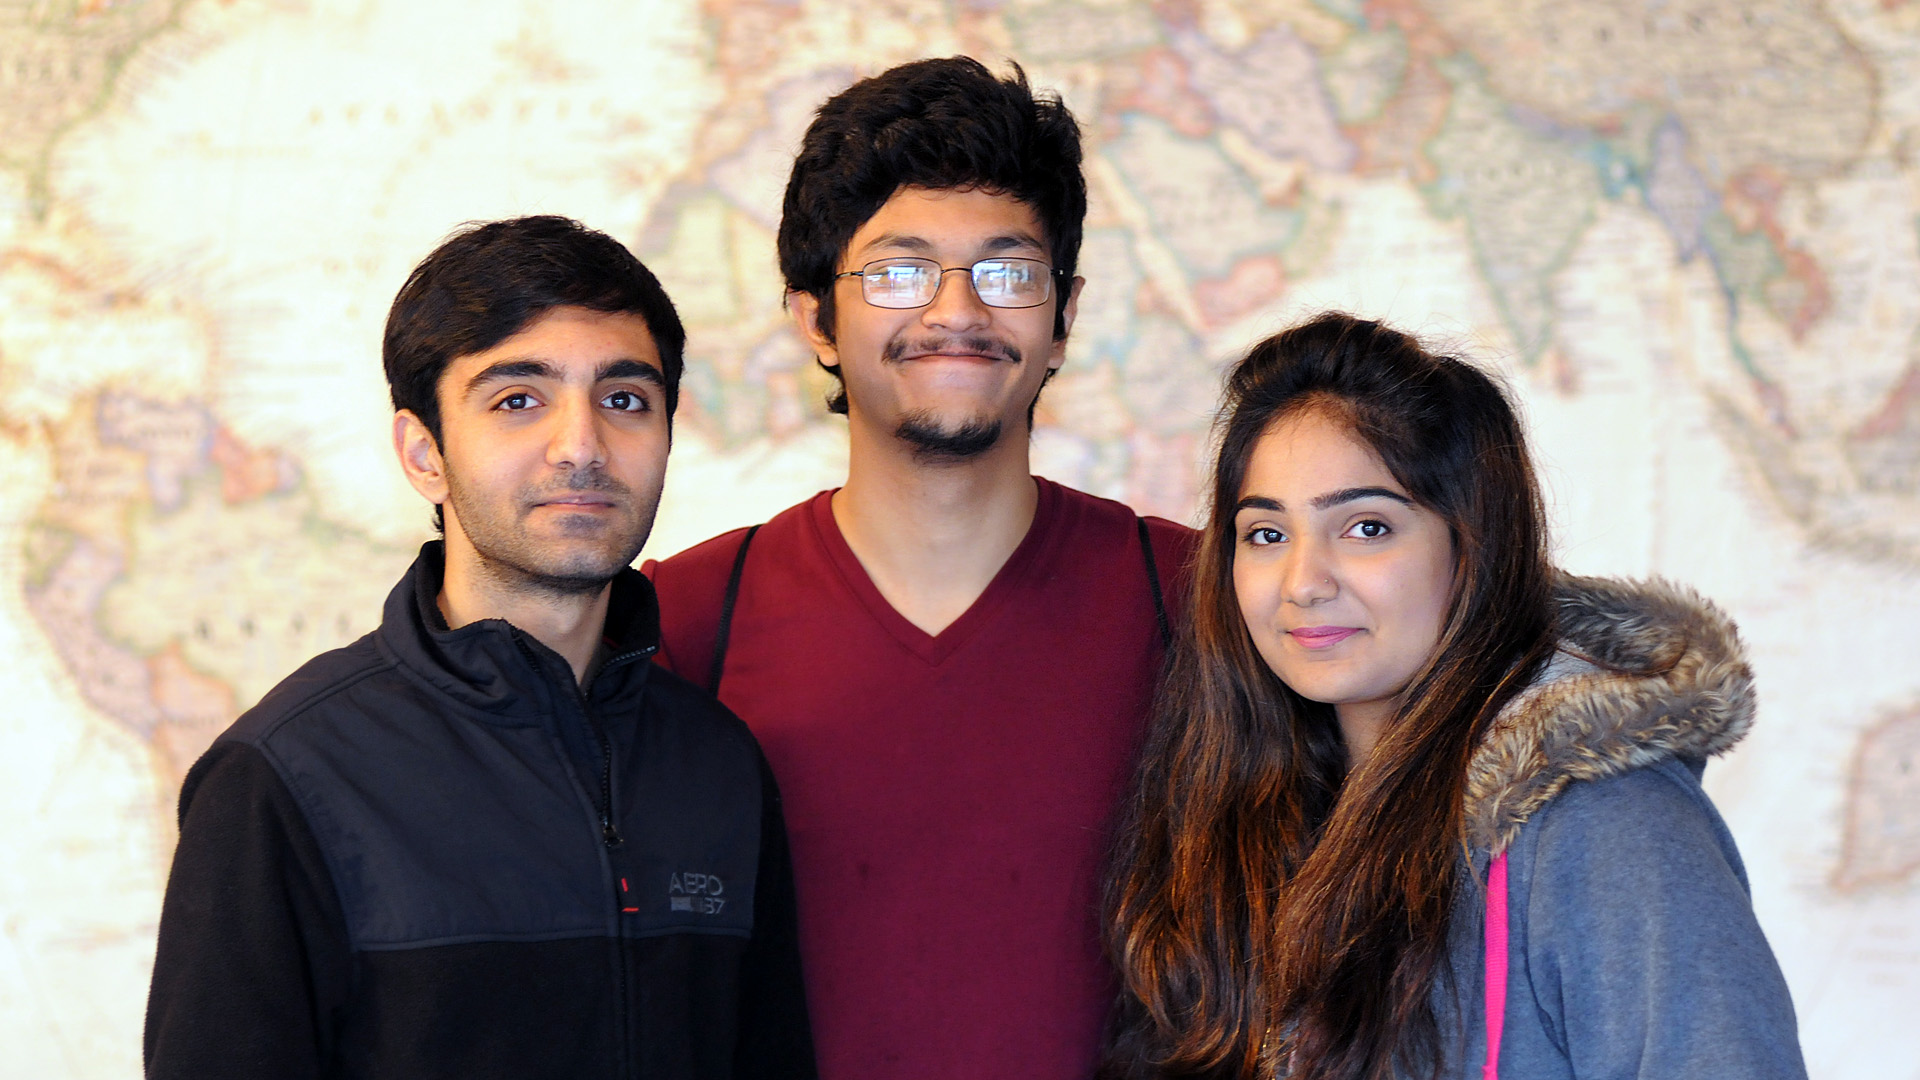 Waleed Ali, Saeef Alam & Sahar Ali standing in front of a large world map